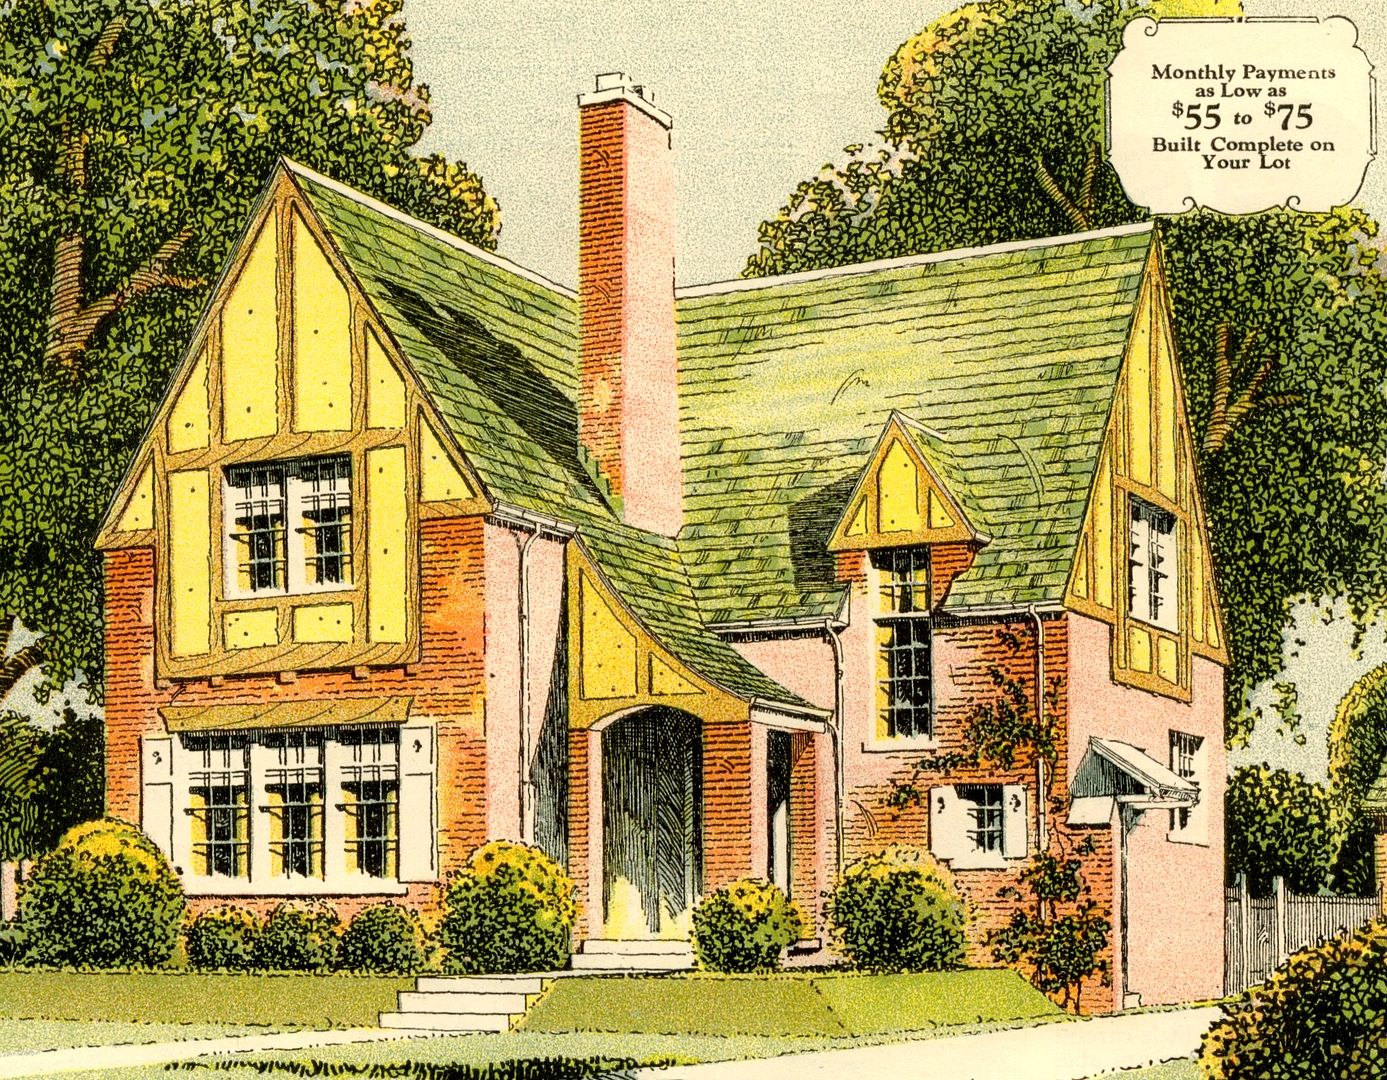 The Elmhurst was featured in the 1930 Sears Modern Homes catalog and had a two-page spread. 